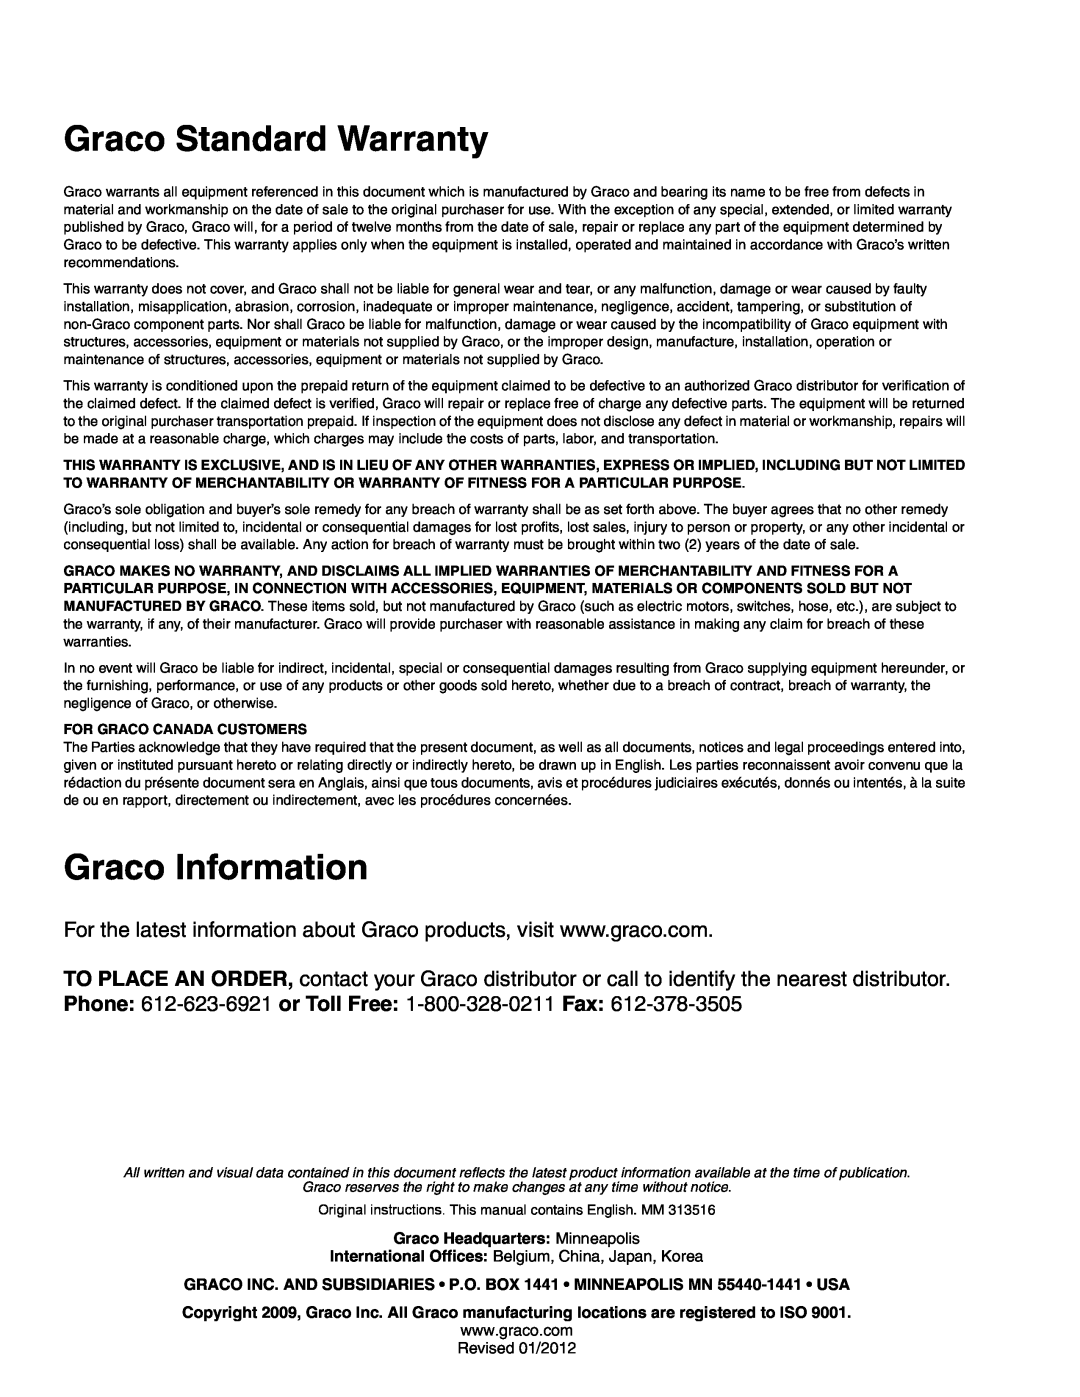 Graco ti13585a, ti13586a important safety instructions Graco Standard Warranty, Graco Information 